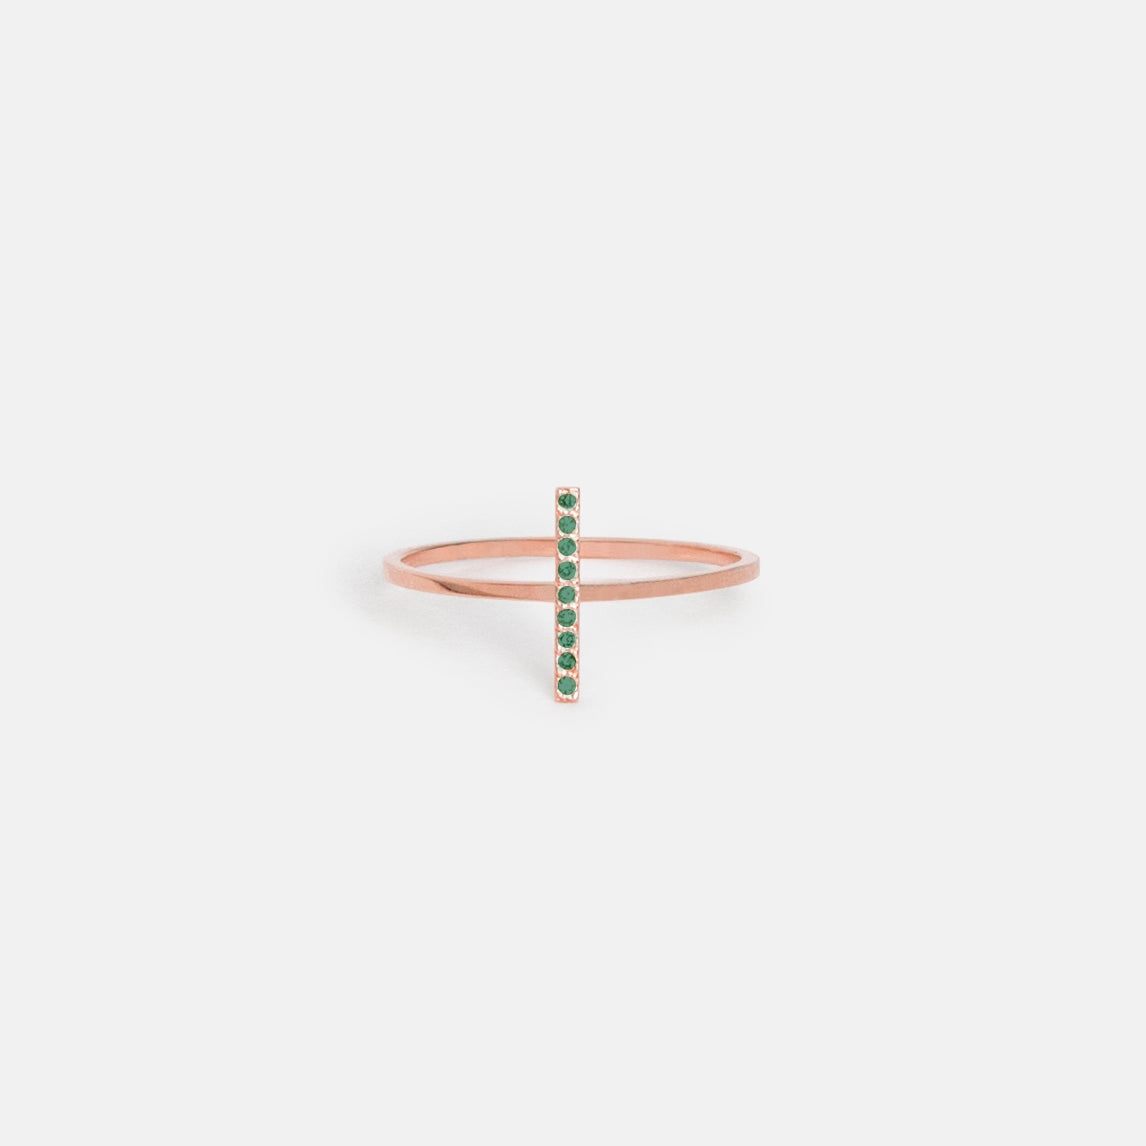 Steva Designer Ring in 14k Rose Gold set with Emeralds by SHW Fine Jewelry